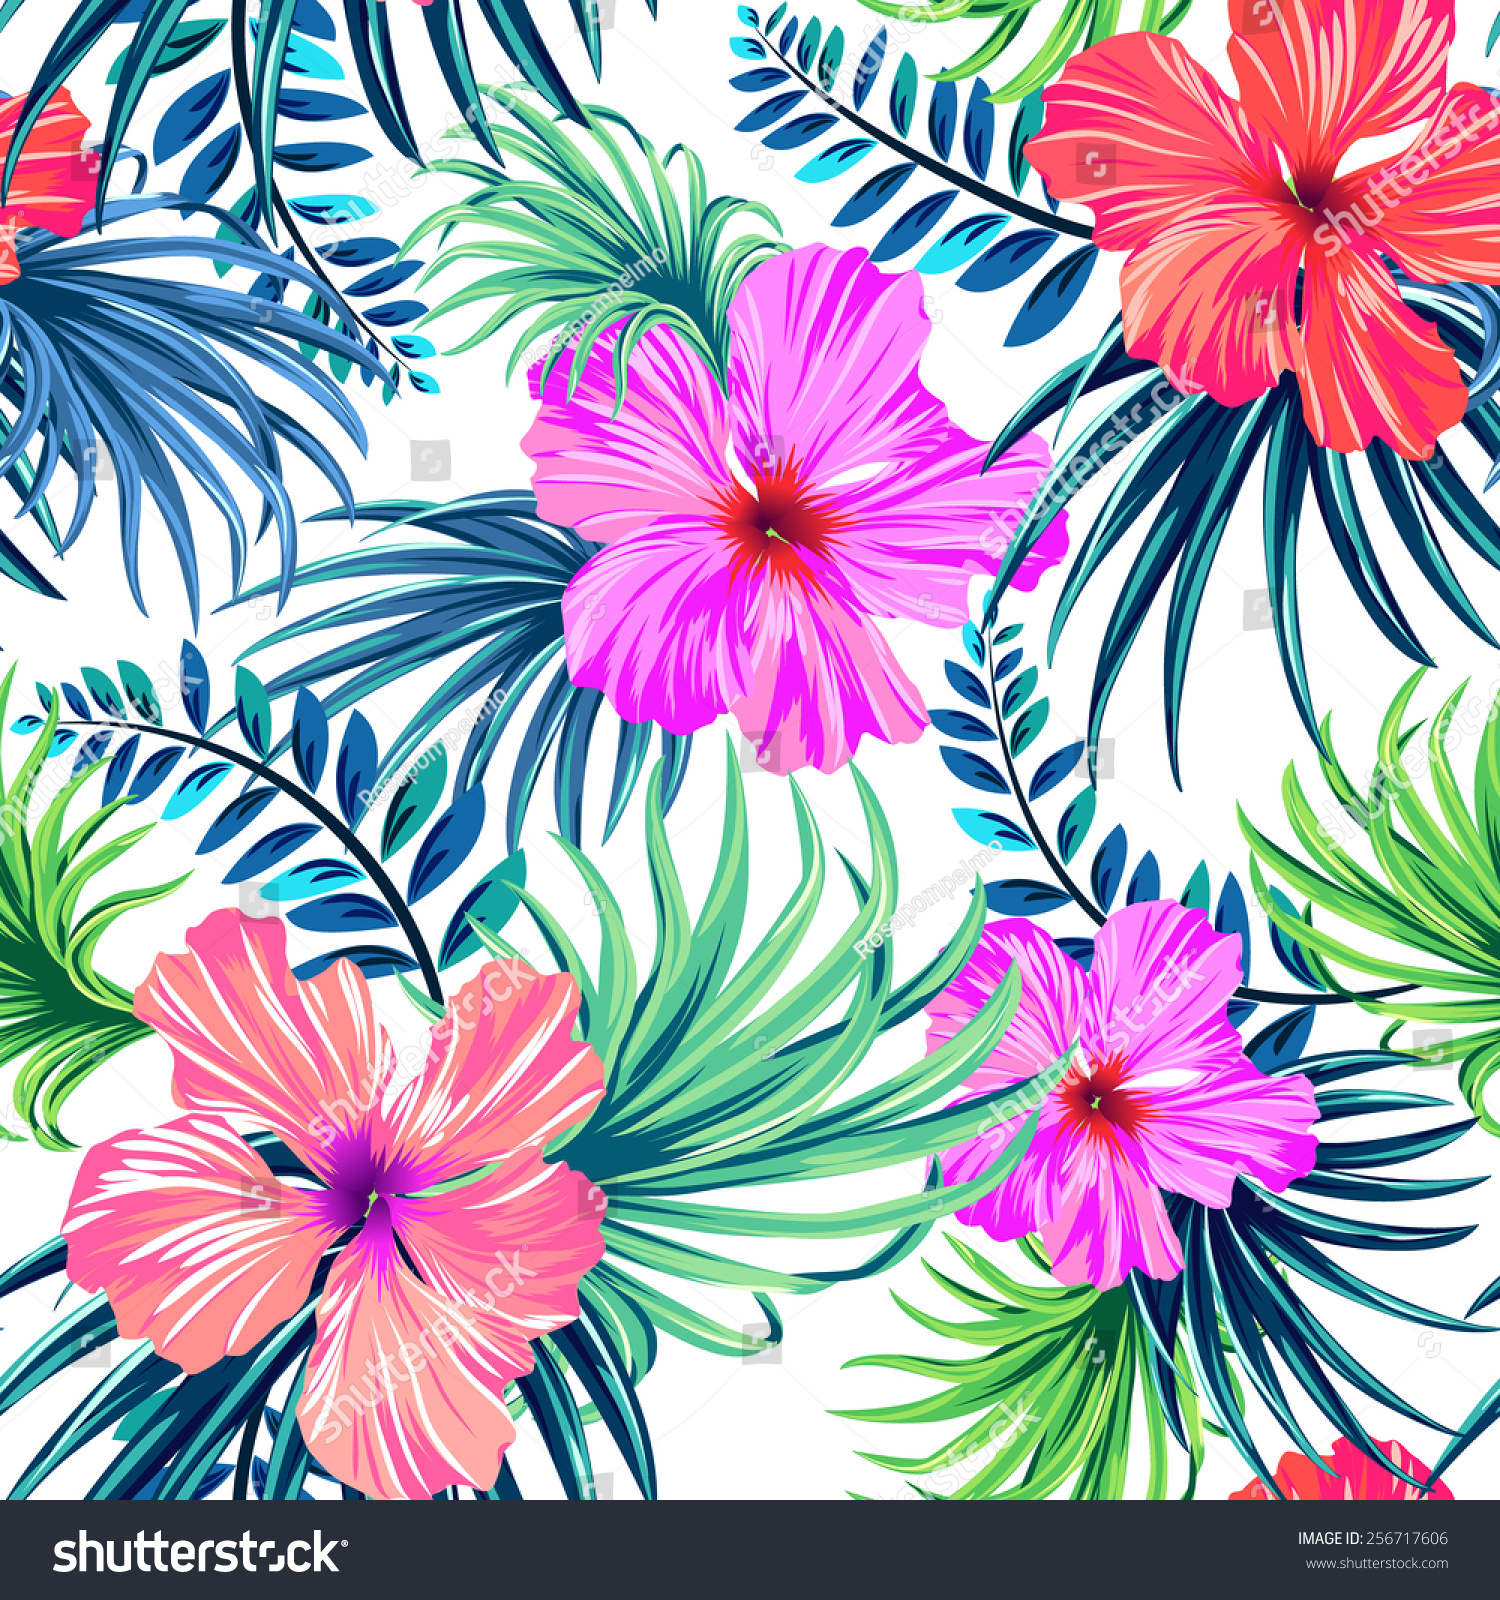 Seamless Tropical Floral Pattern. Hibiscus And Palm Leaves On White ...